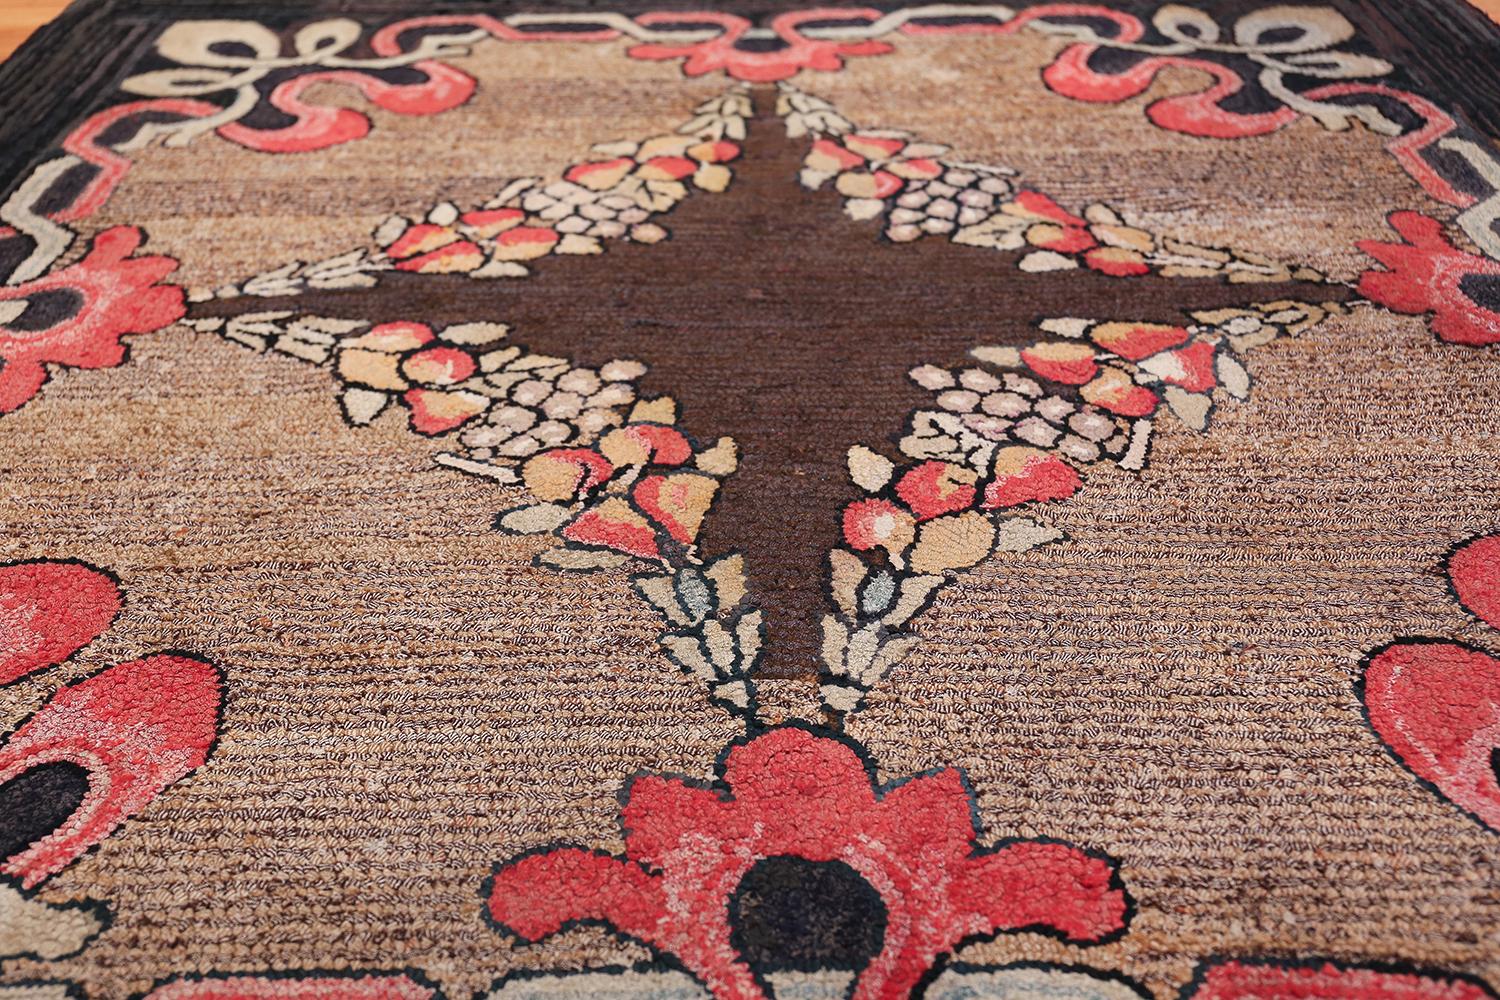 Wool Antique American Hooked Rug. Size: 5 ft 9 in x 5 ft 10 in For Sale